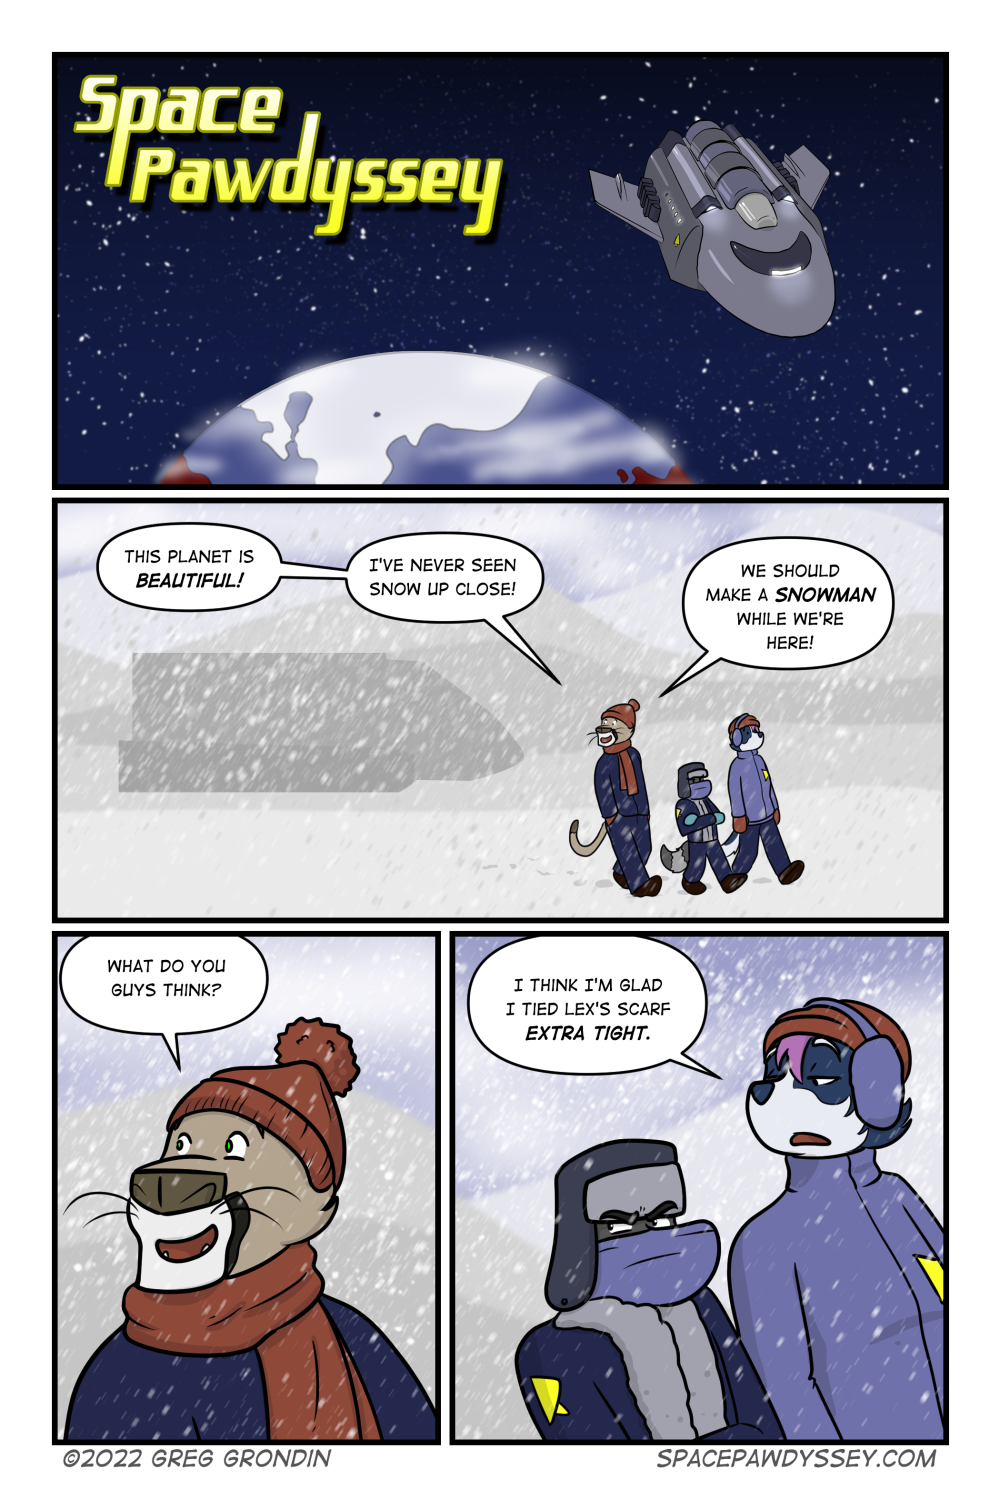 Space Pawdyssey #571